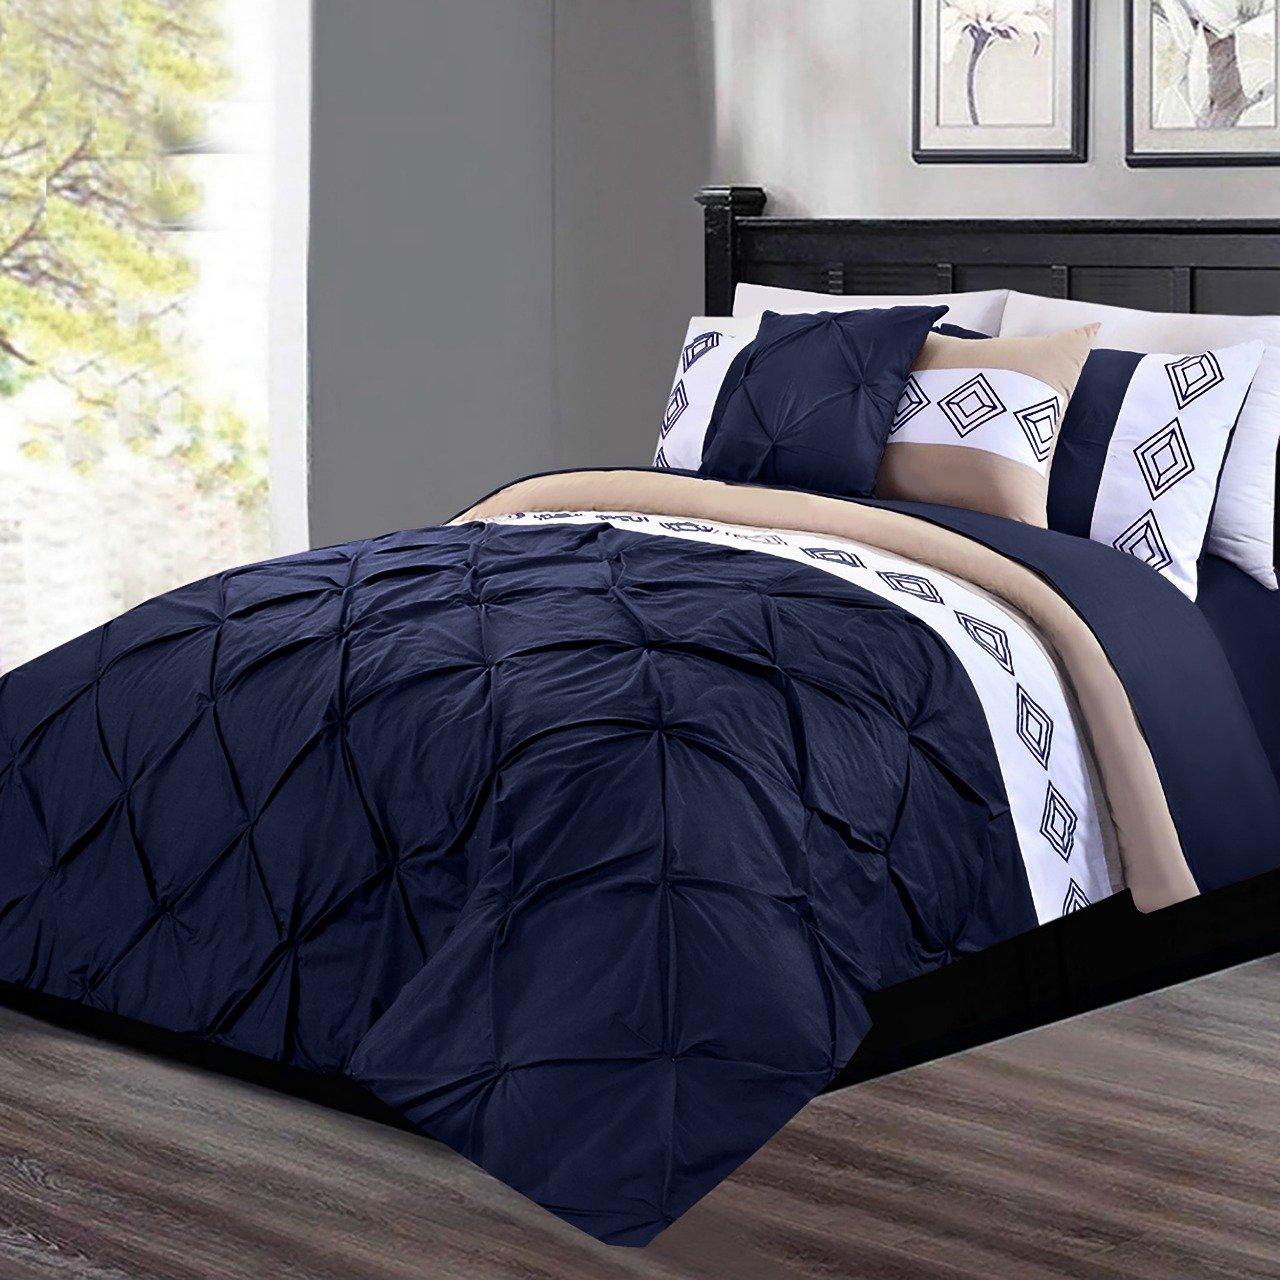 8 Pc's Luxury Embroidered Bedspread Navy With Light Filling - 92Bedding